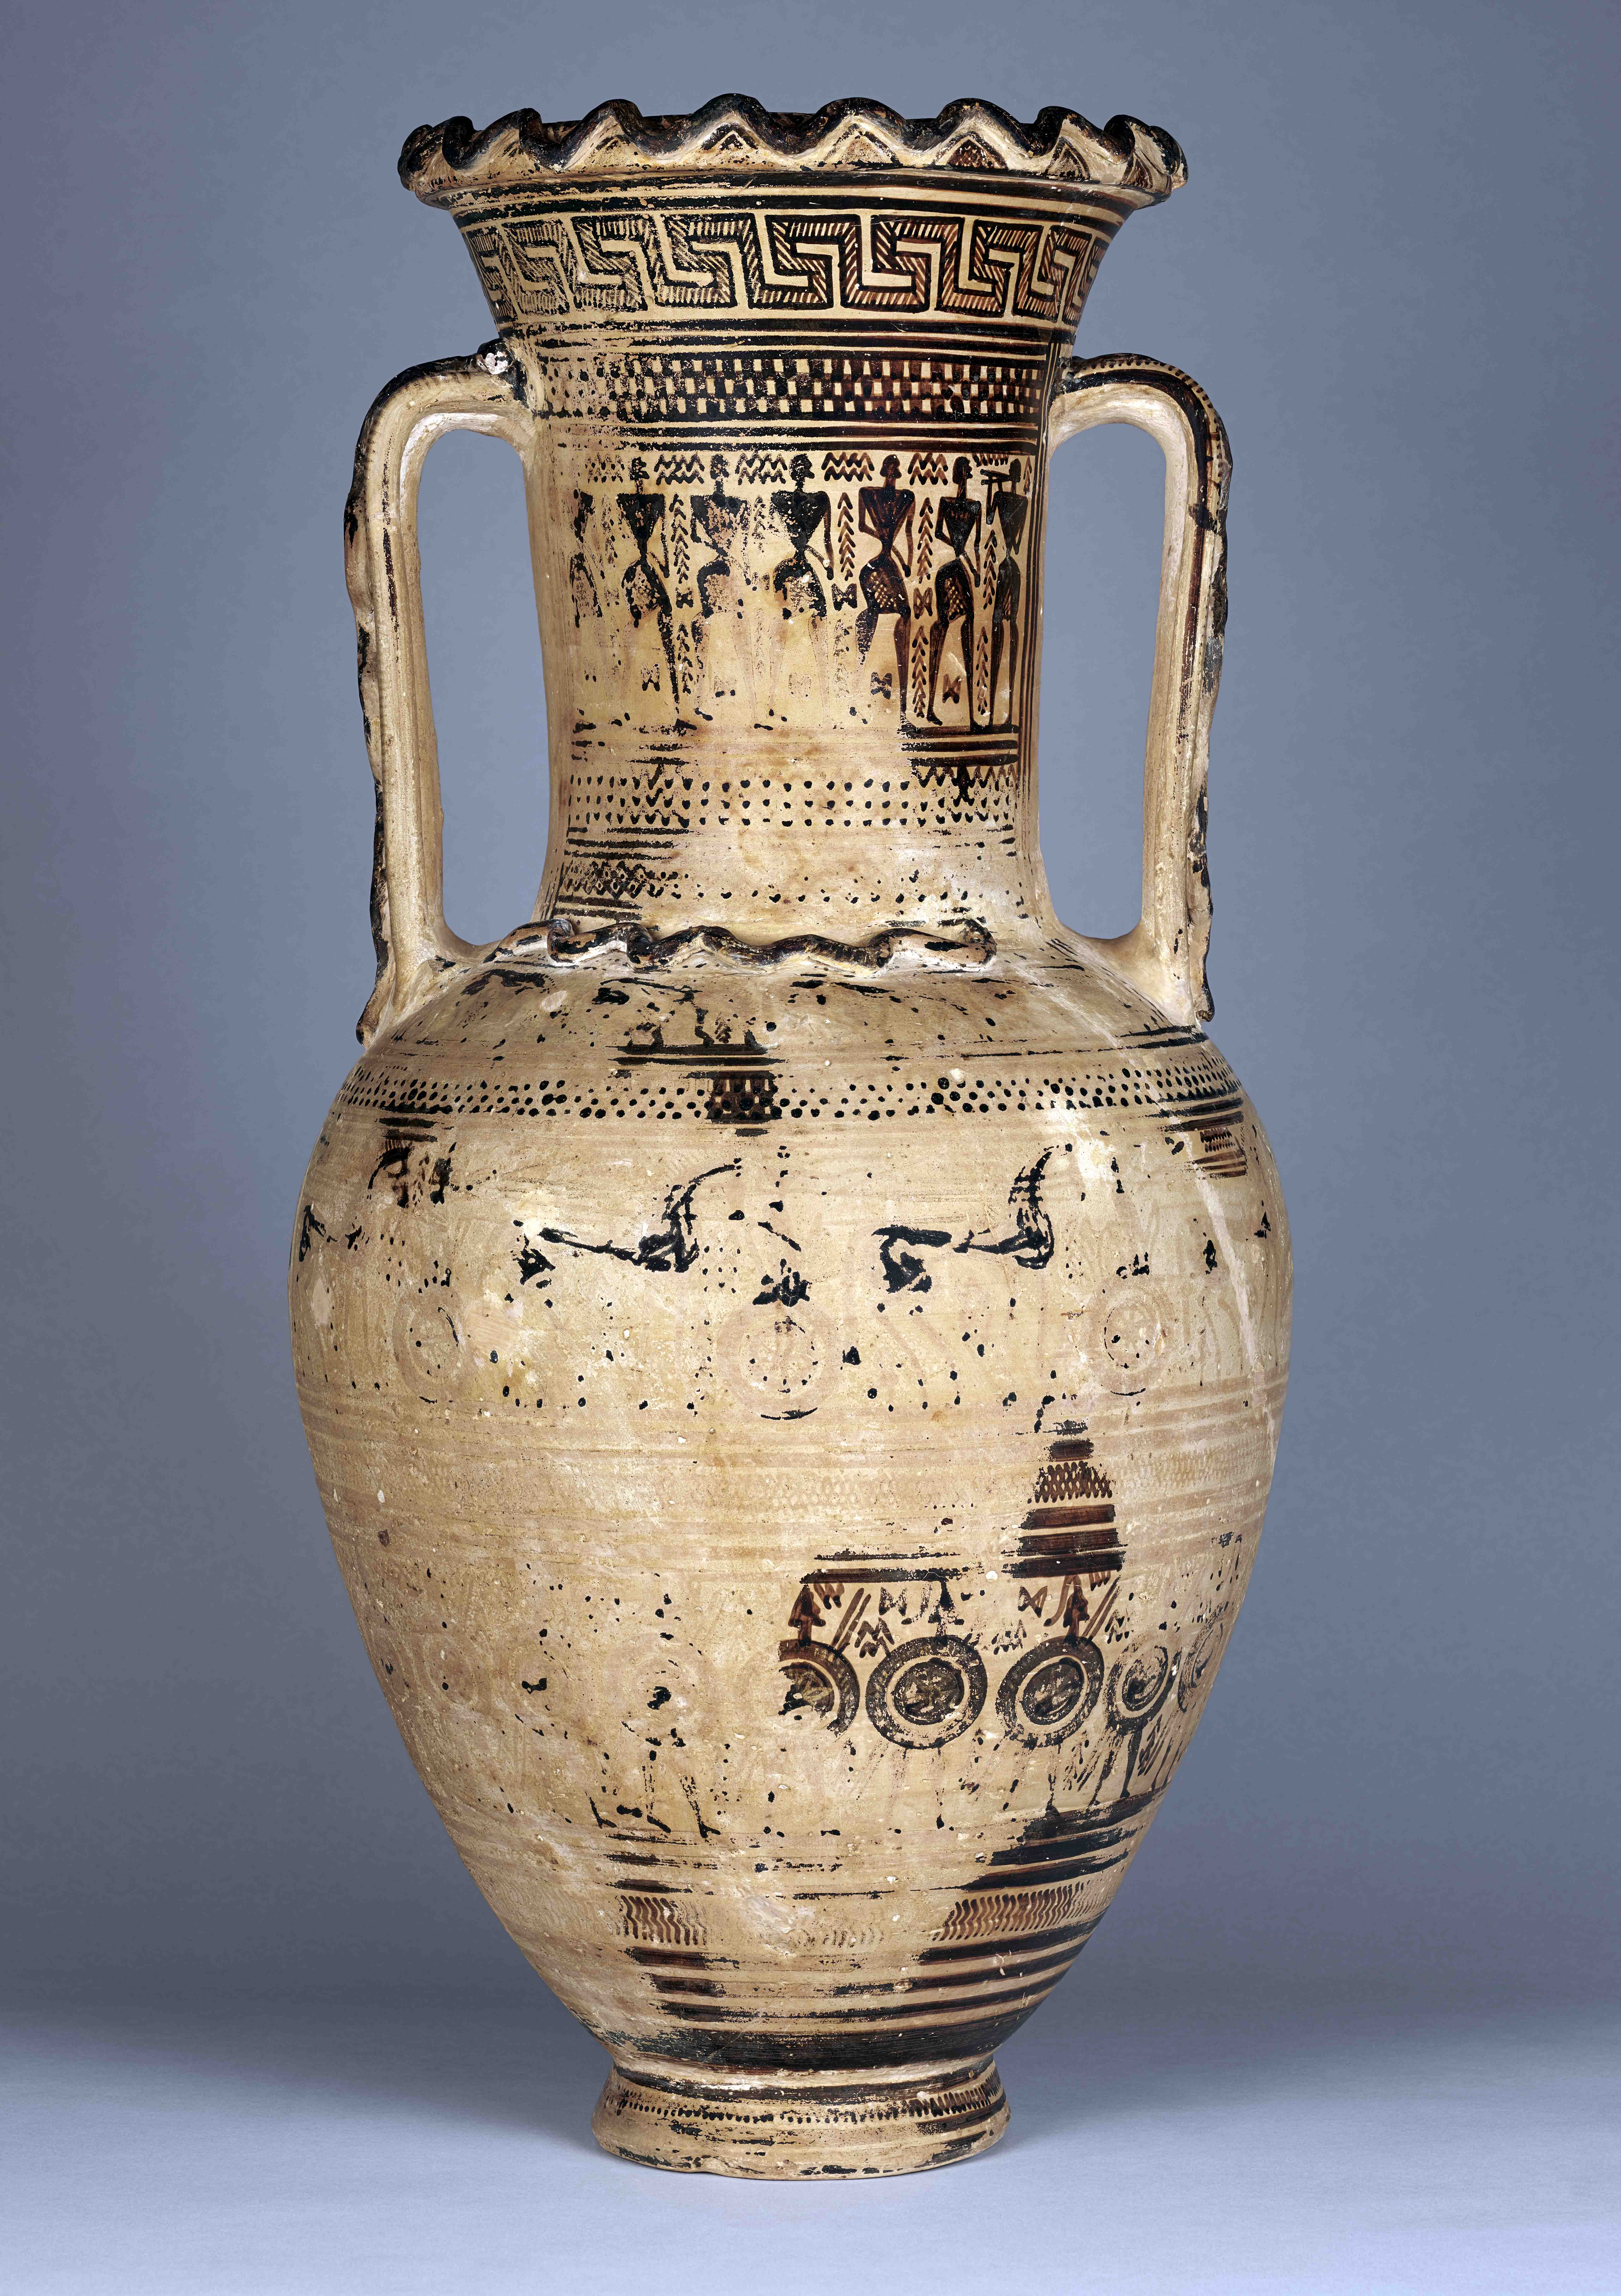 Funerary Amphora with Scenes of Mourning, 720–700 B.C., Greek, made in Athens. Terracotta, 27 5/8 x 12 in. The J. Paul Getty Museum, 2016.35. Purchased in part with funds provided by the Villa Council. Digital image courtesy of the Getty’s Open Content Program